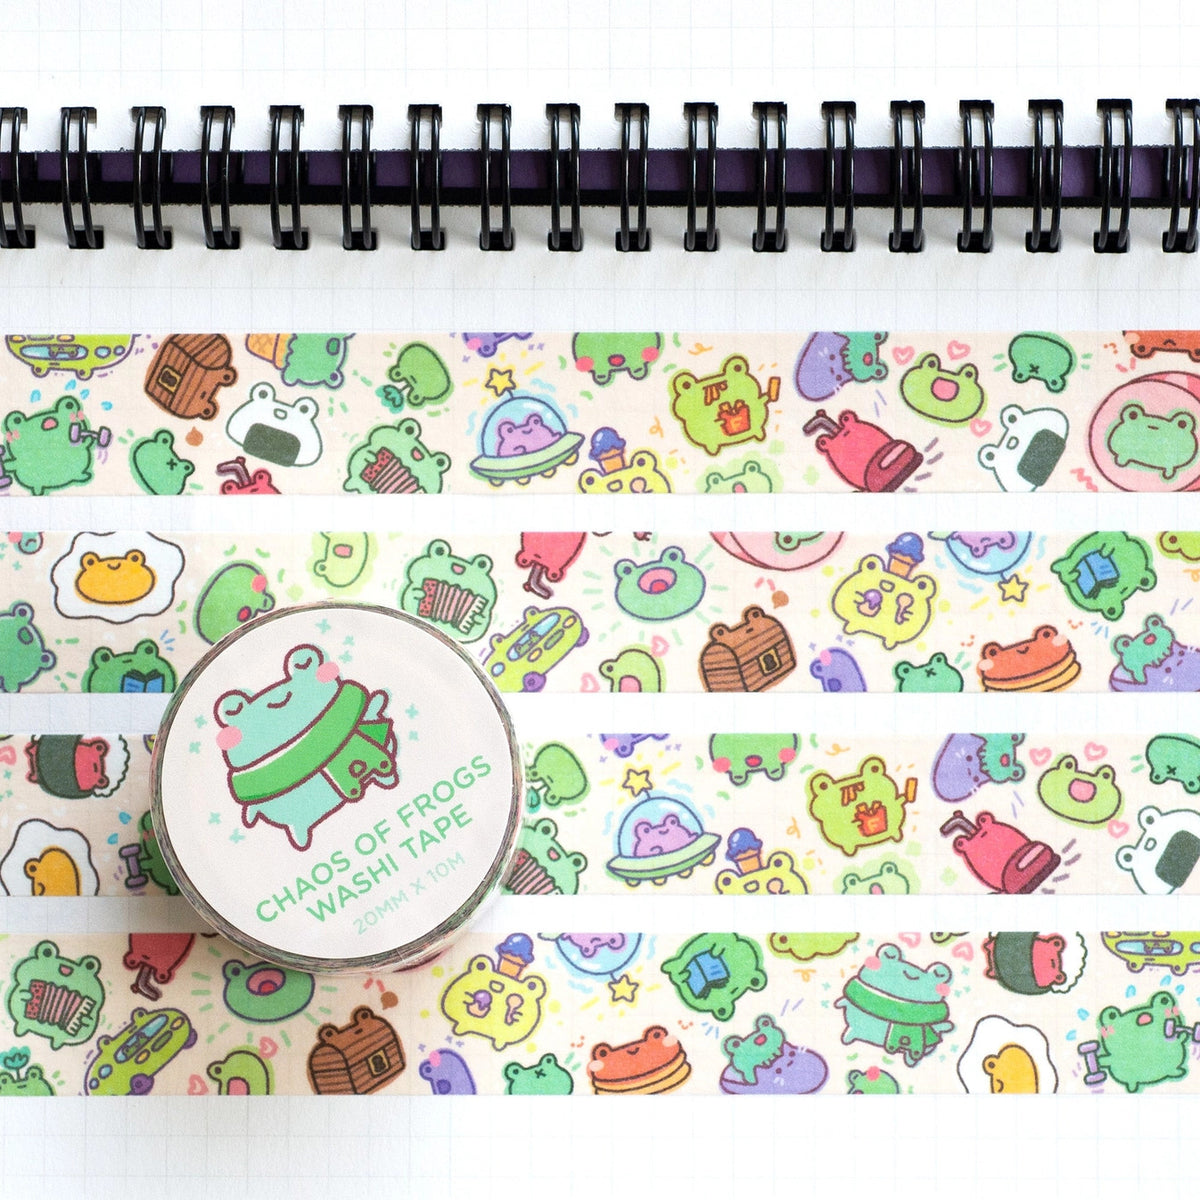 Robot Dance Battle - Chaos of Frogs Washi Tape